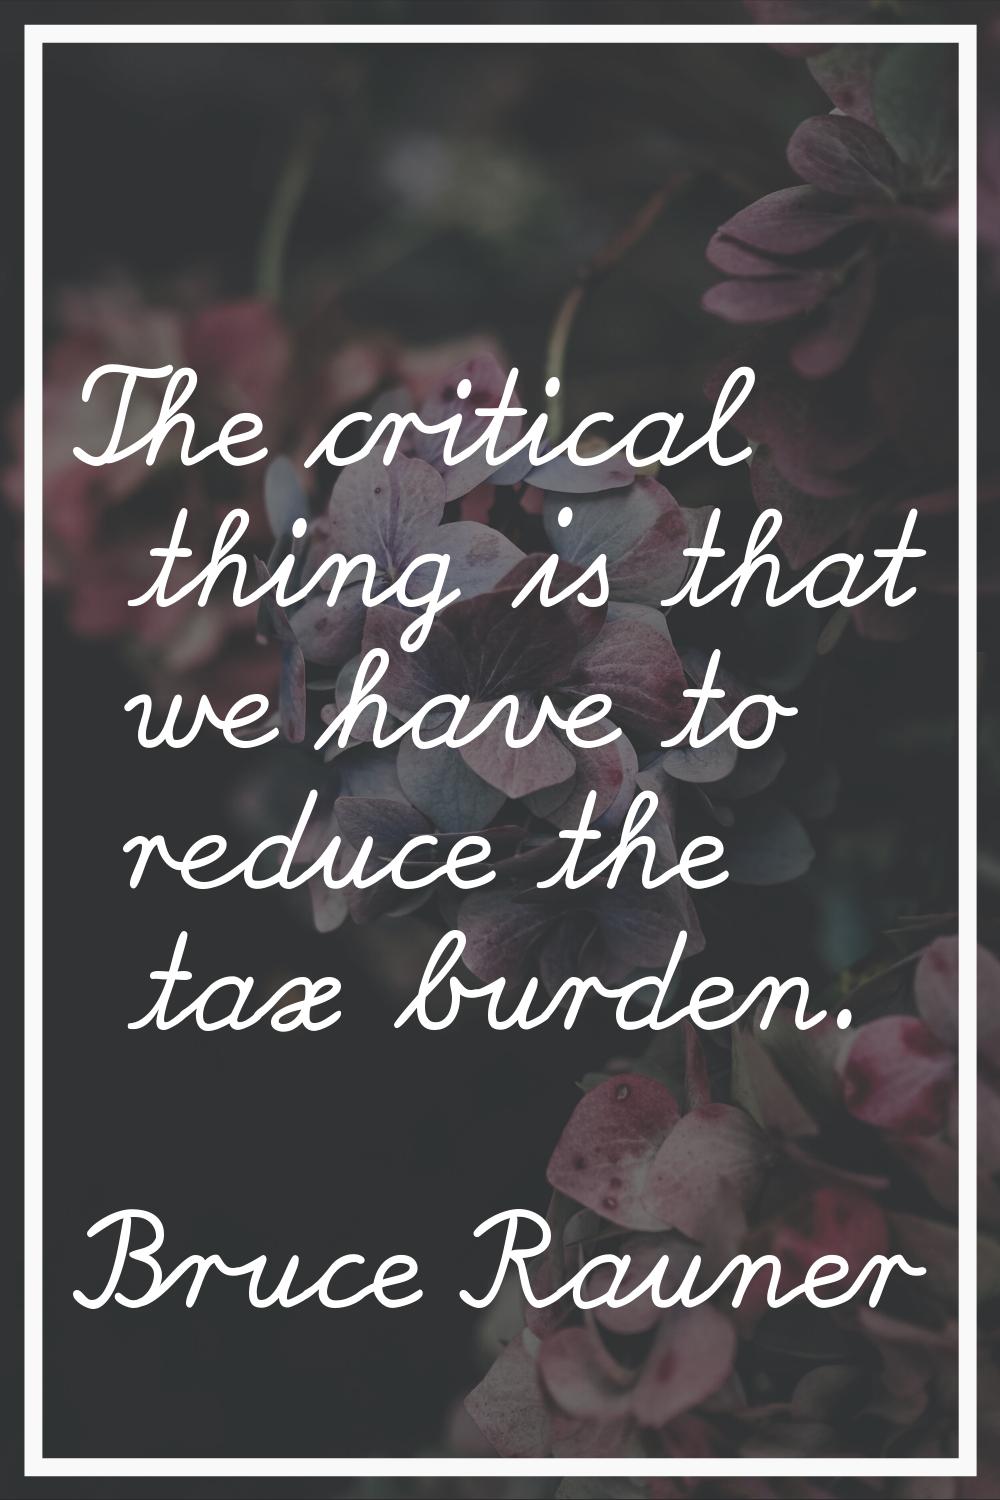 The critical thing is that we have to reduce the tax burden.